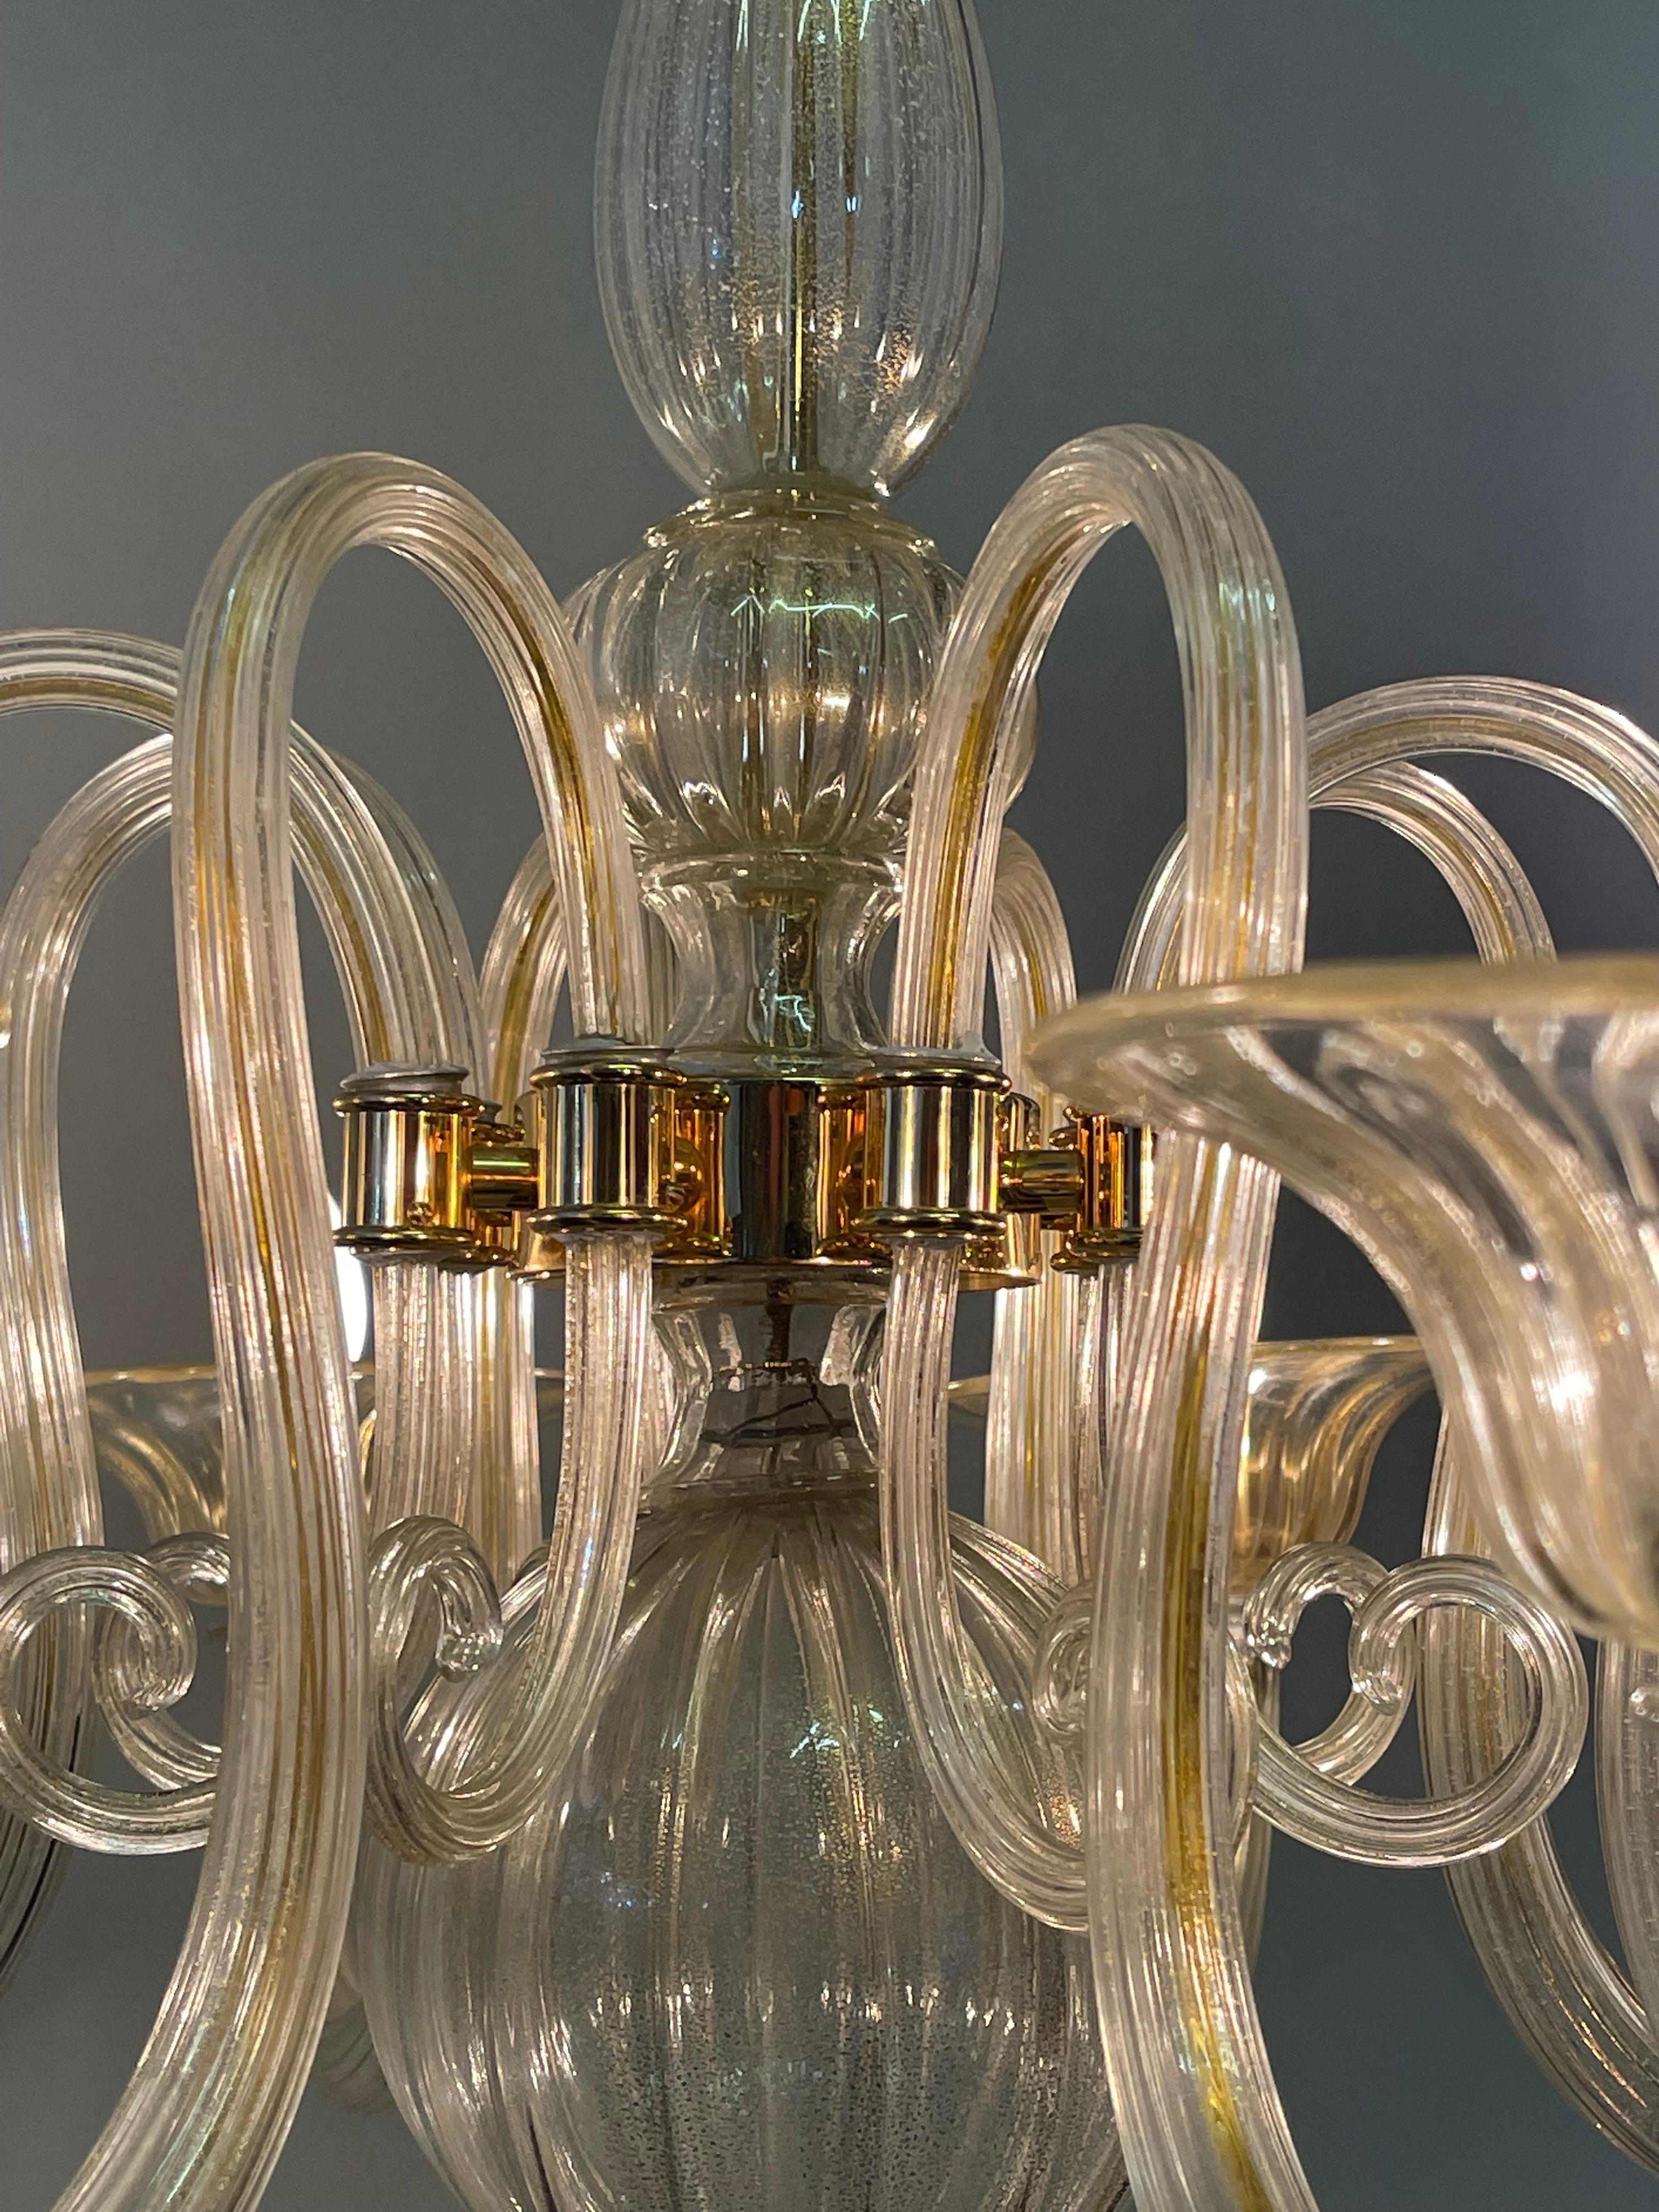 Metal Large Barovier Toso Gold Dusted Murano Glass Chandelier, circa 1960s For Sale